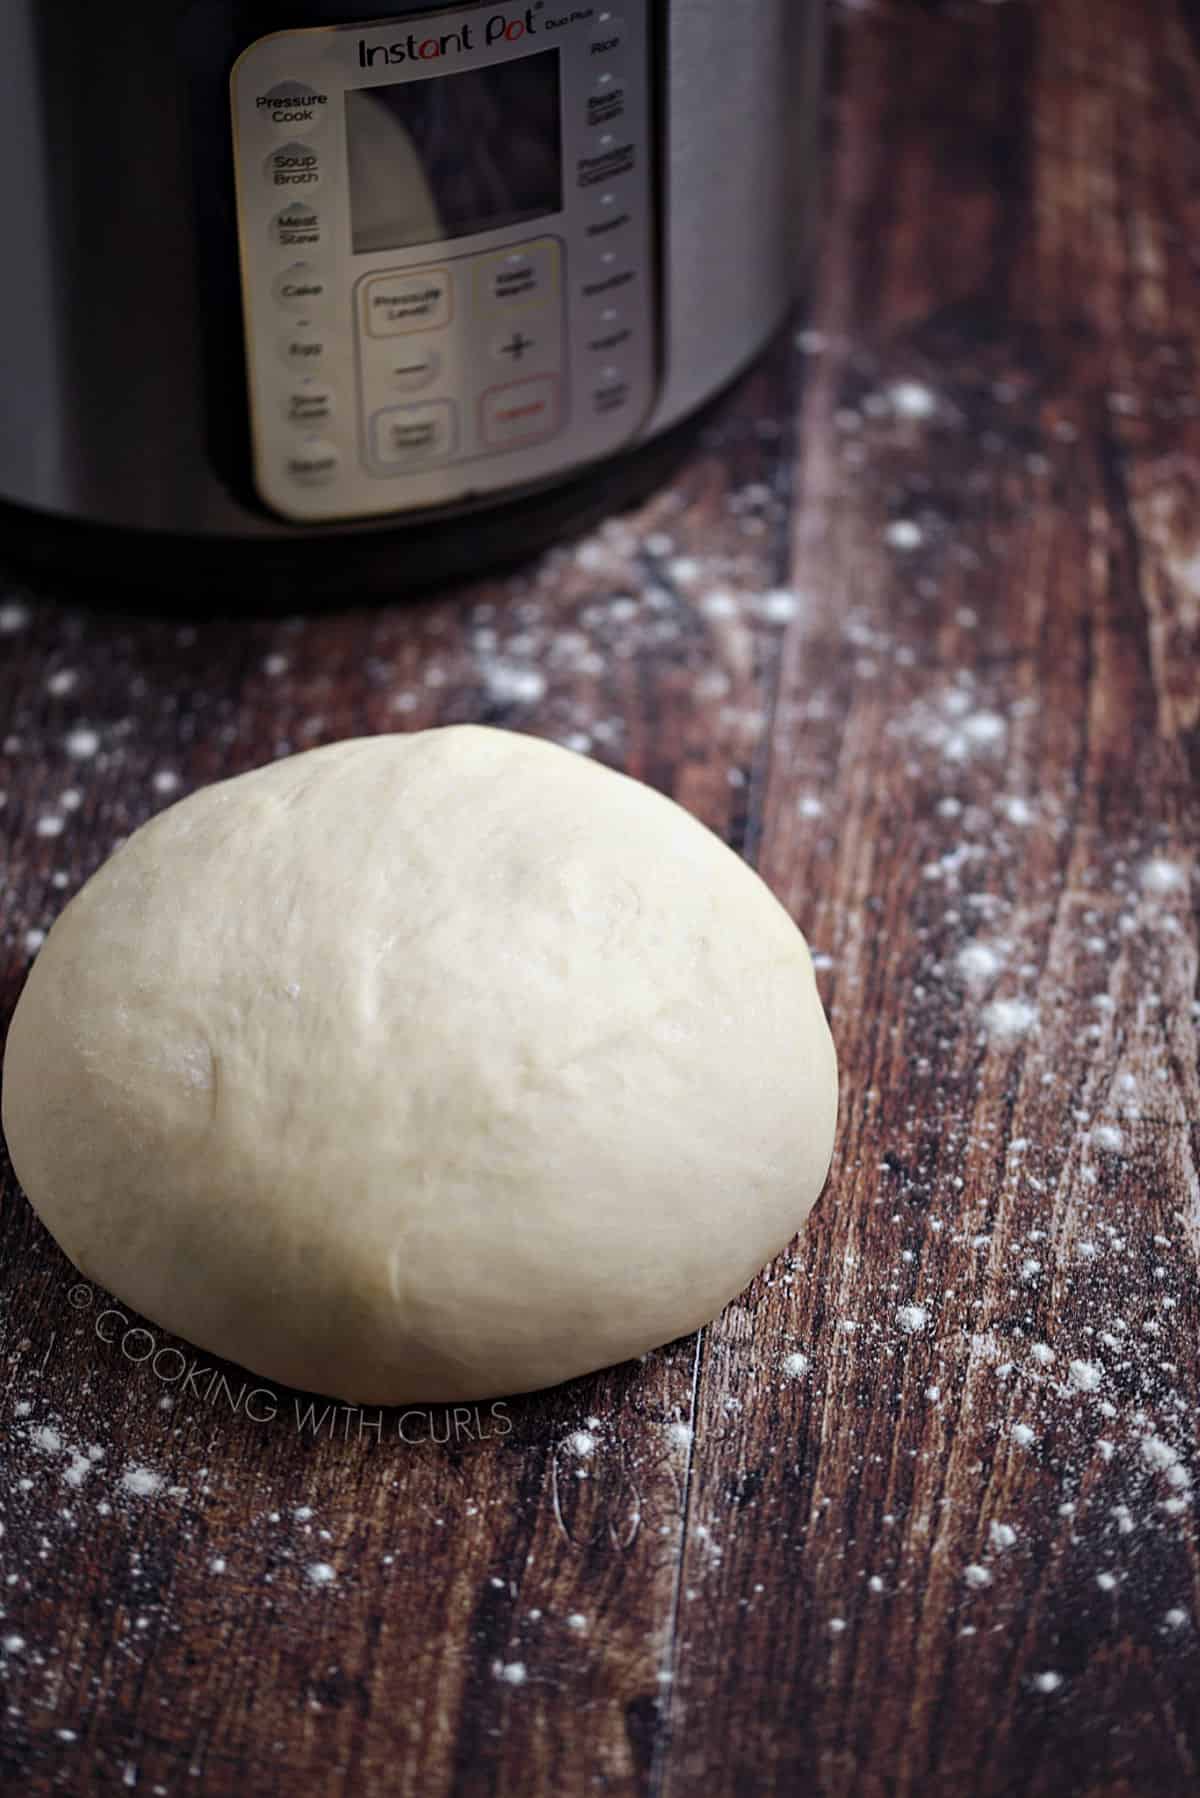 A ball of pizza dough on a flour dusted wood surface with an Instant Pot in the background.